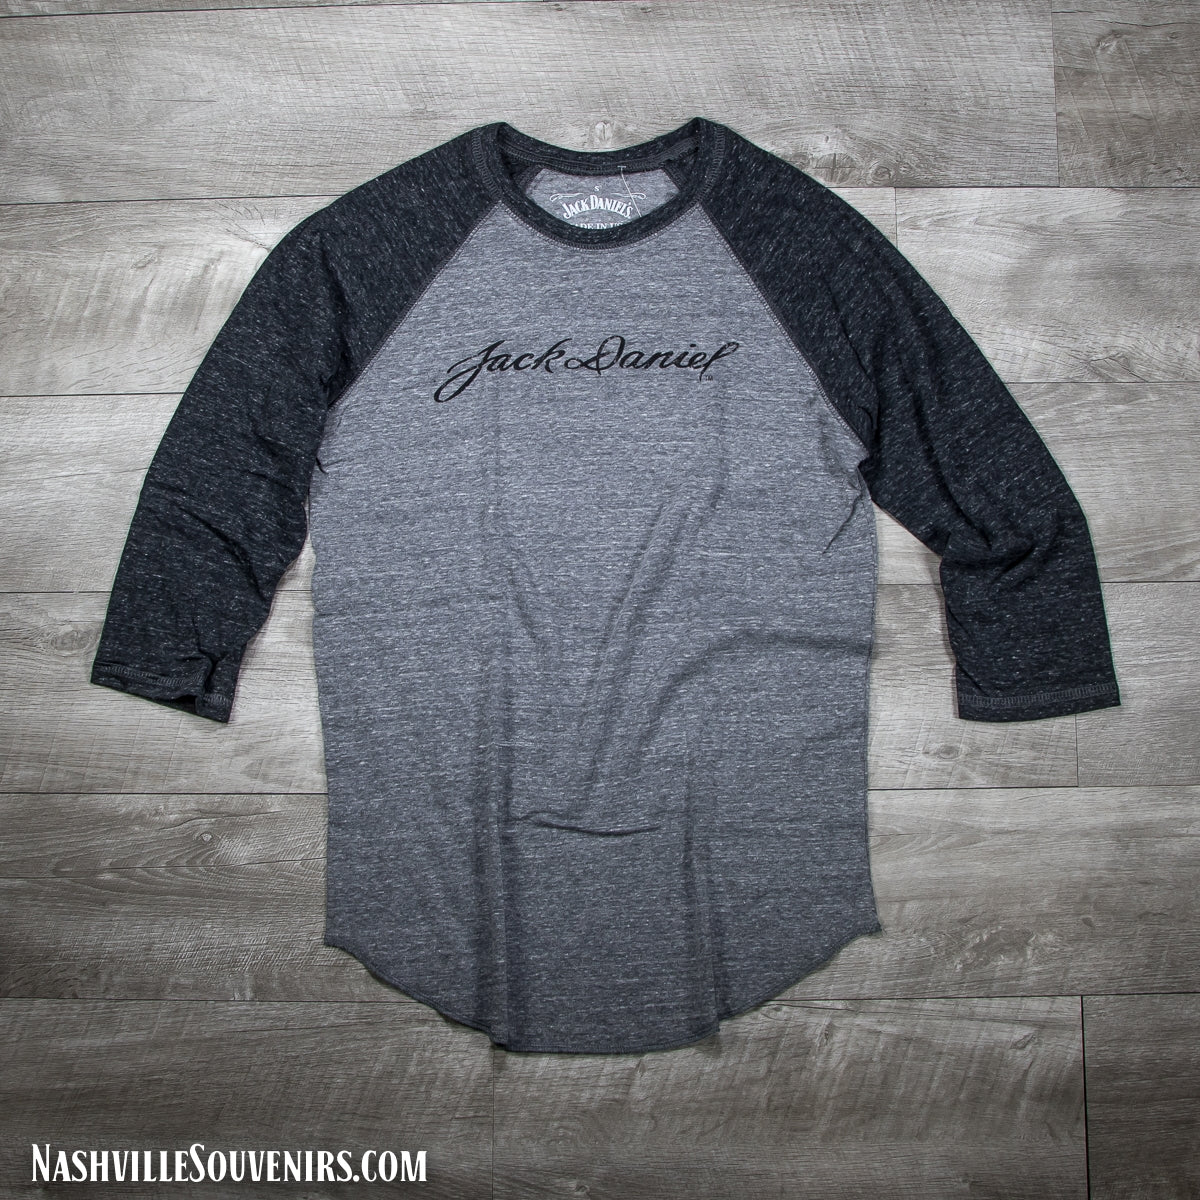 Officially licensed ladies Jack Daniels 3/4 Sleeve T-Shirt with lighter gray body and charcoal gray 3/4 length sleeves. Get yours today with FREE SHIPPING on all US orders over $75!